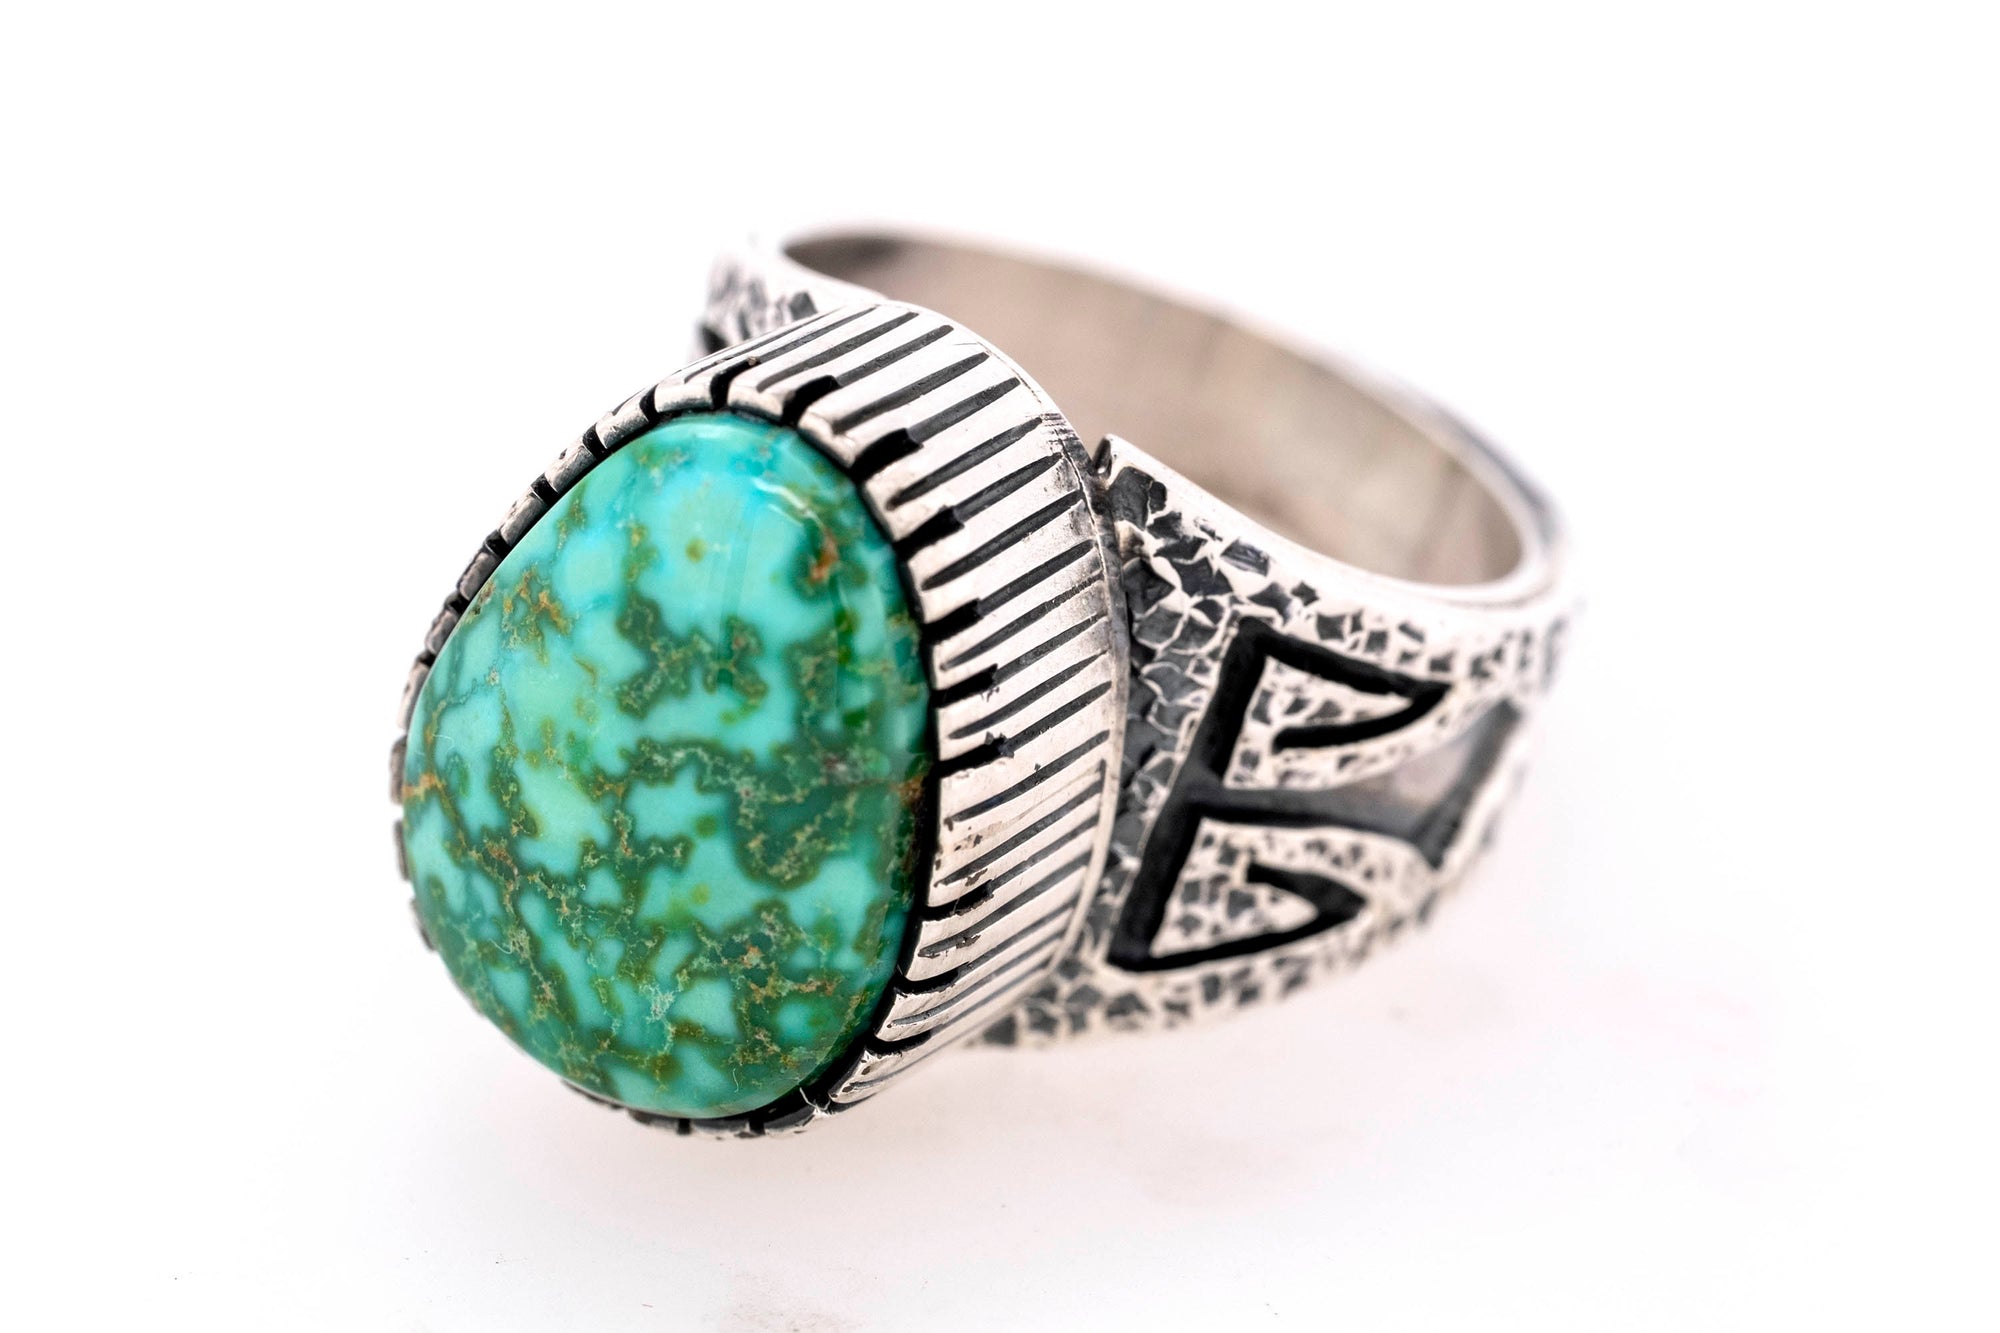 Daniel Benally Sonoran Gold Turquoise Ring - Right Side